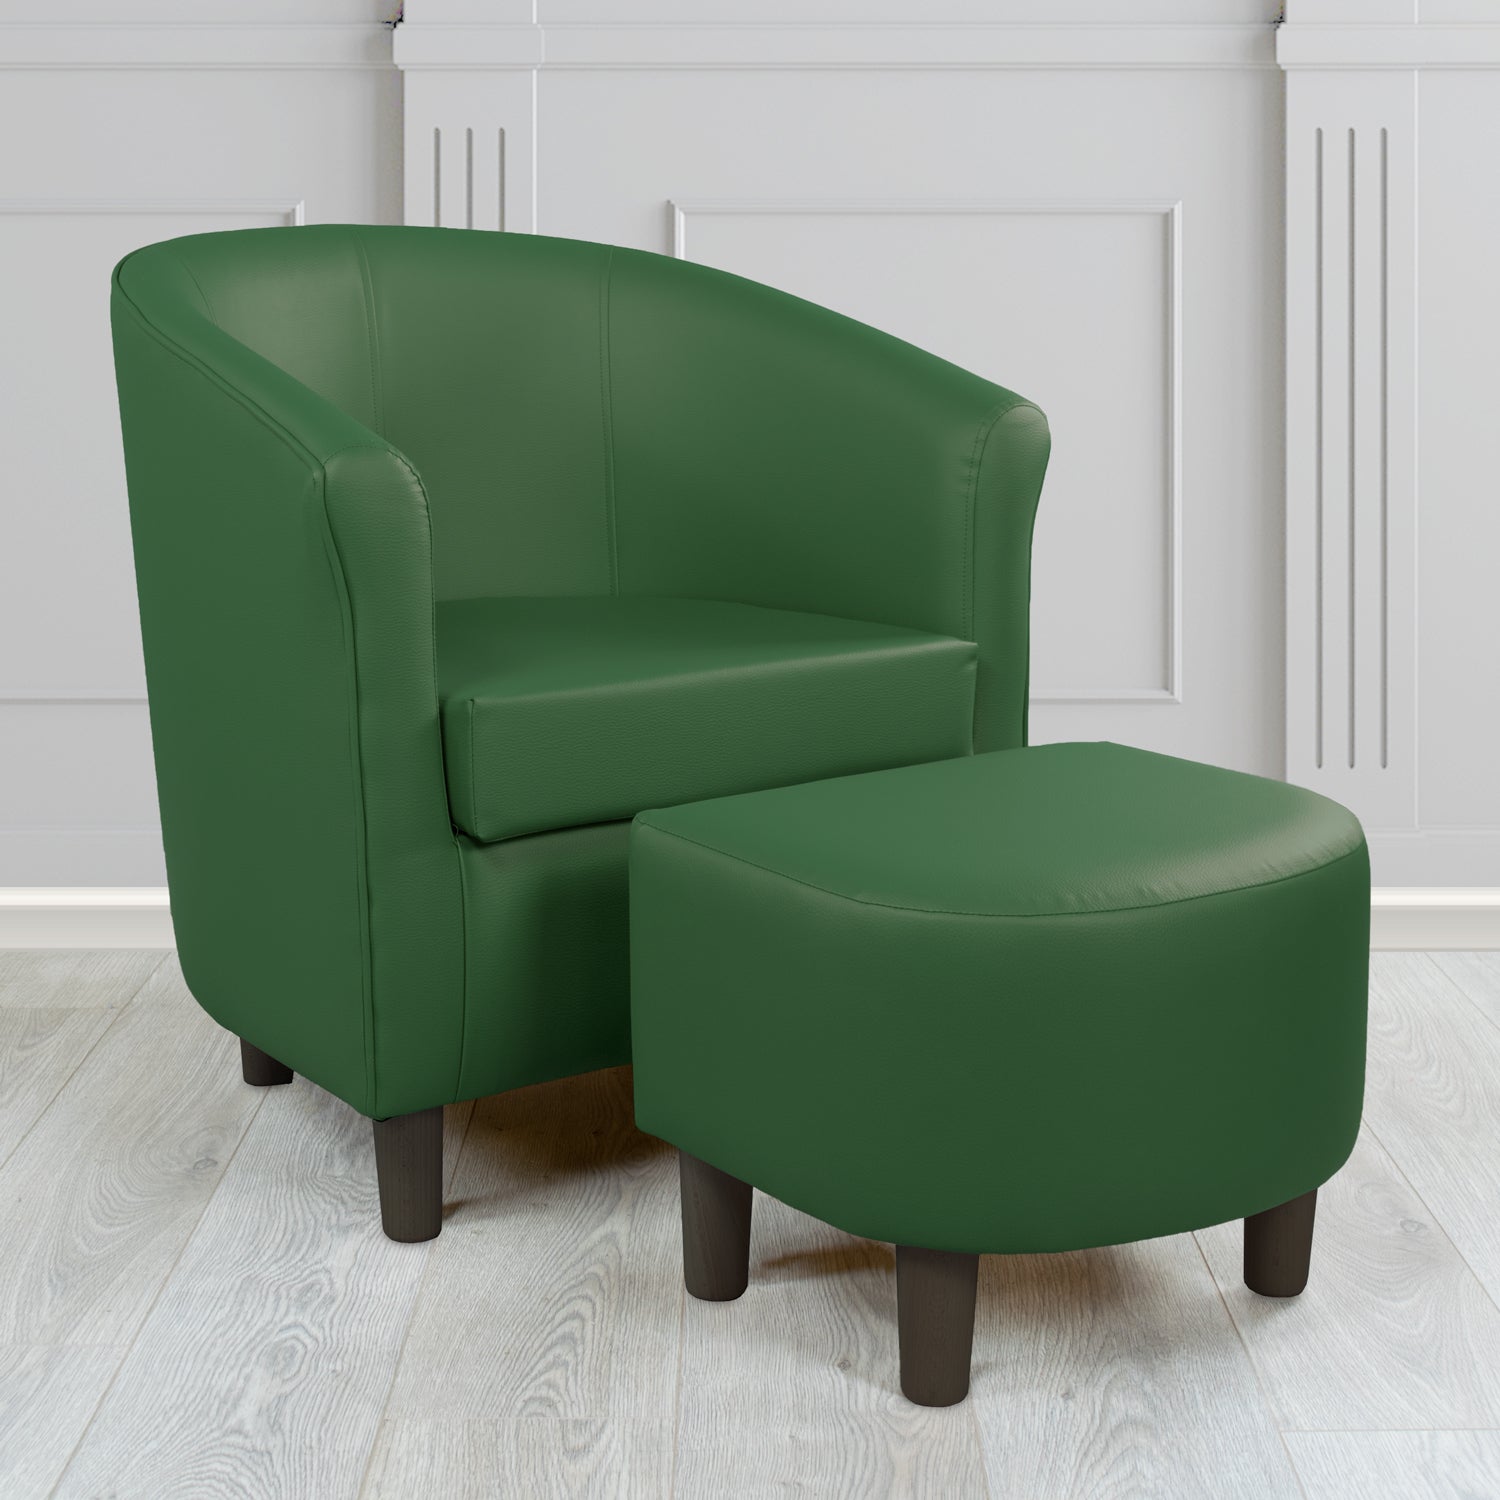 Tuscany Just Colour Rainforest Faux Leather Tub Chair with Footstool Set - The Tub Chair Shop